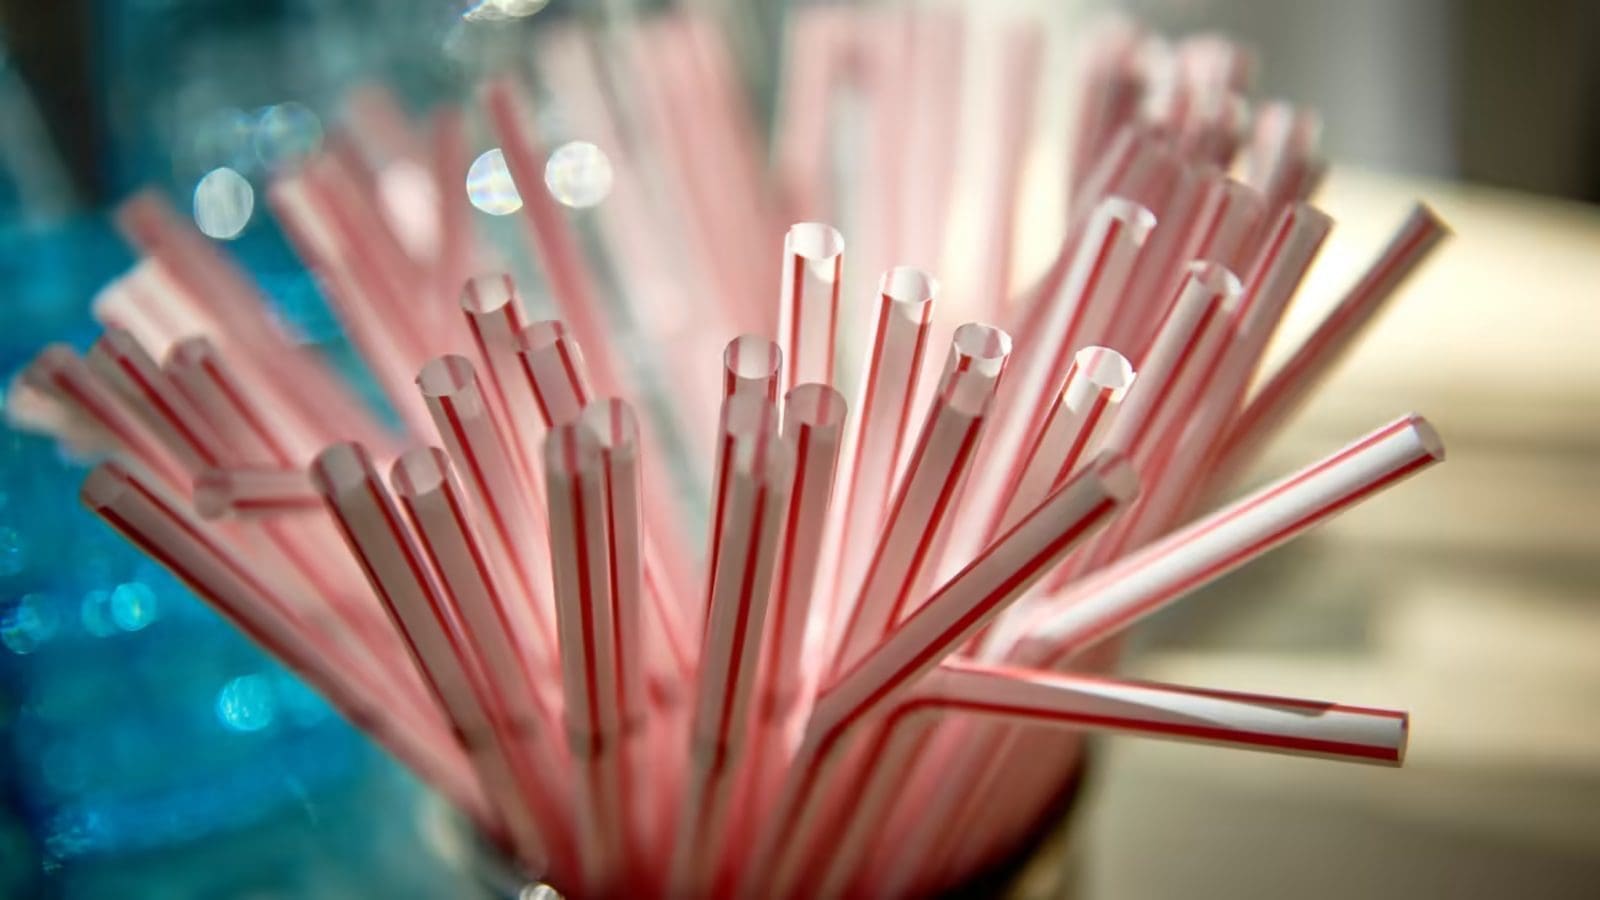 Researchers develop bioplastic straws that degraded significantly in two months